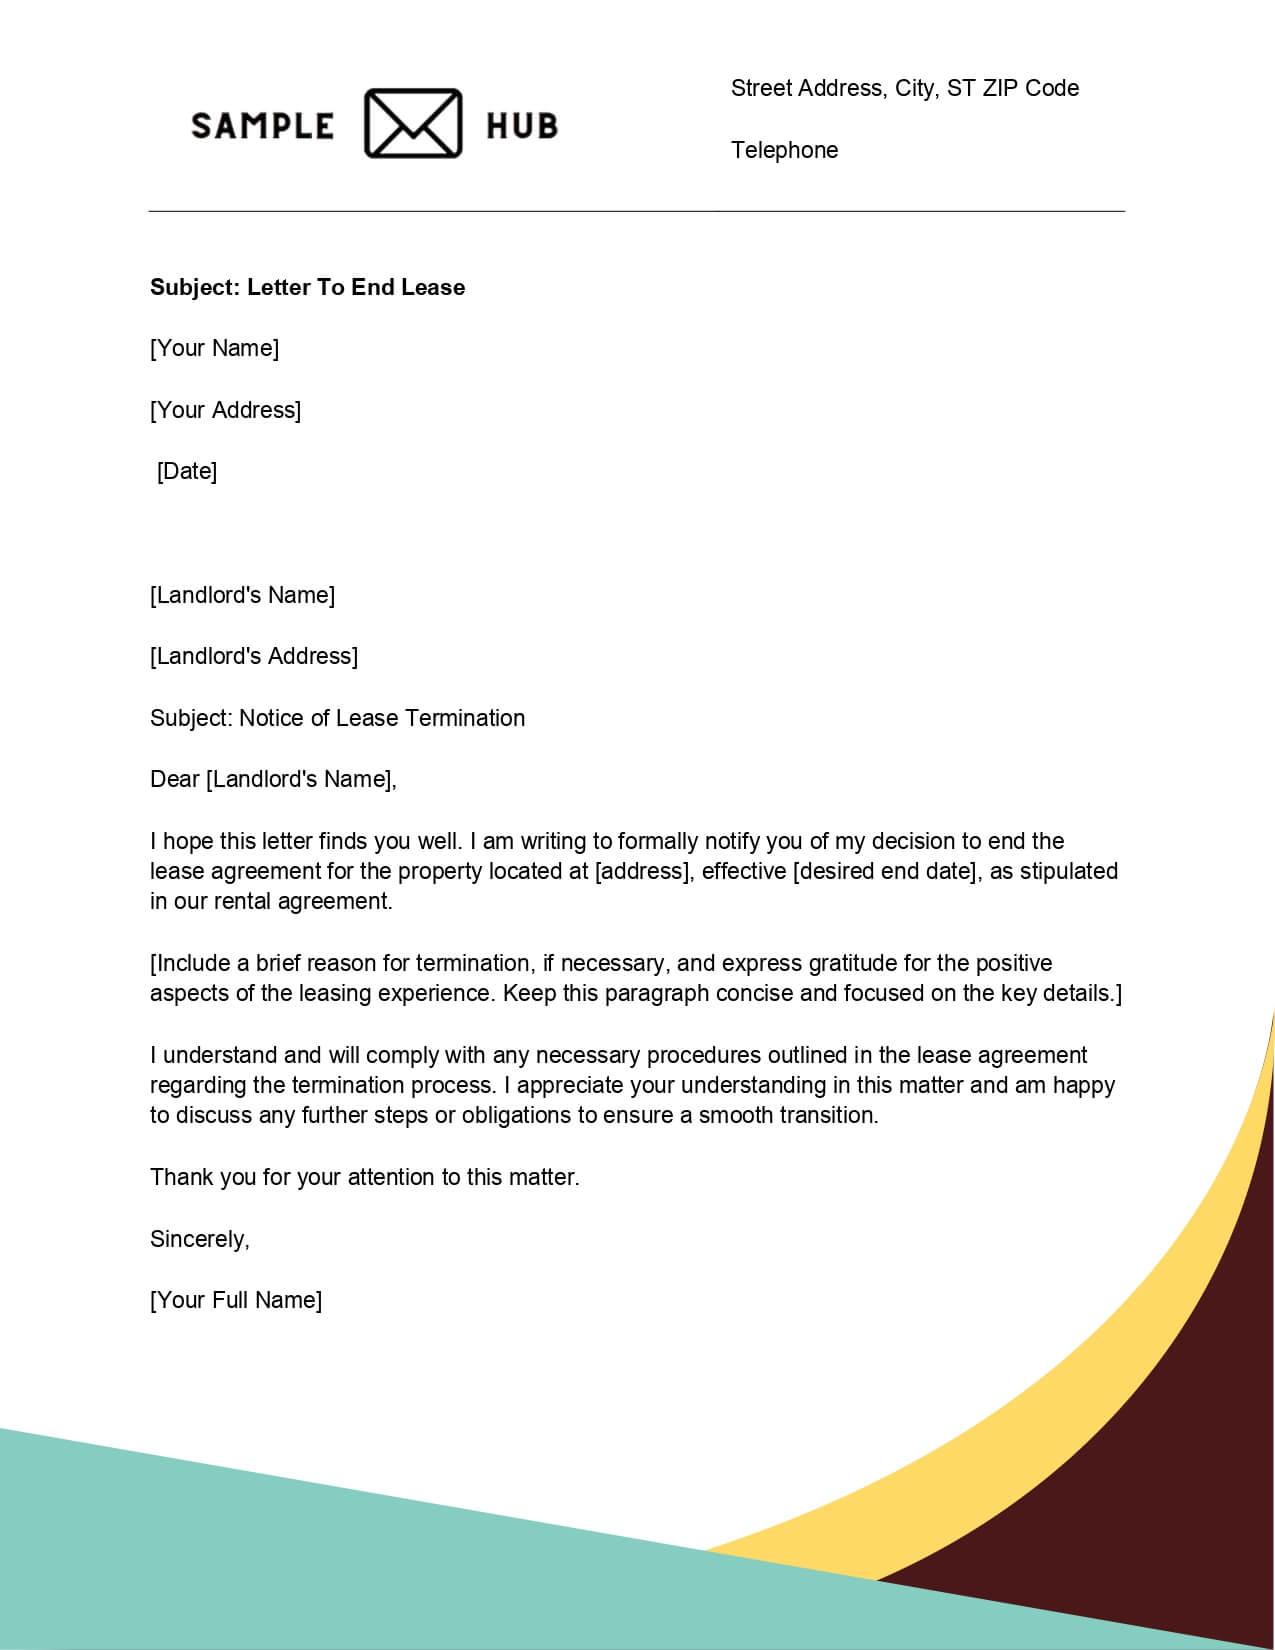 Letter To End Lease